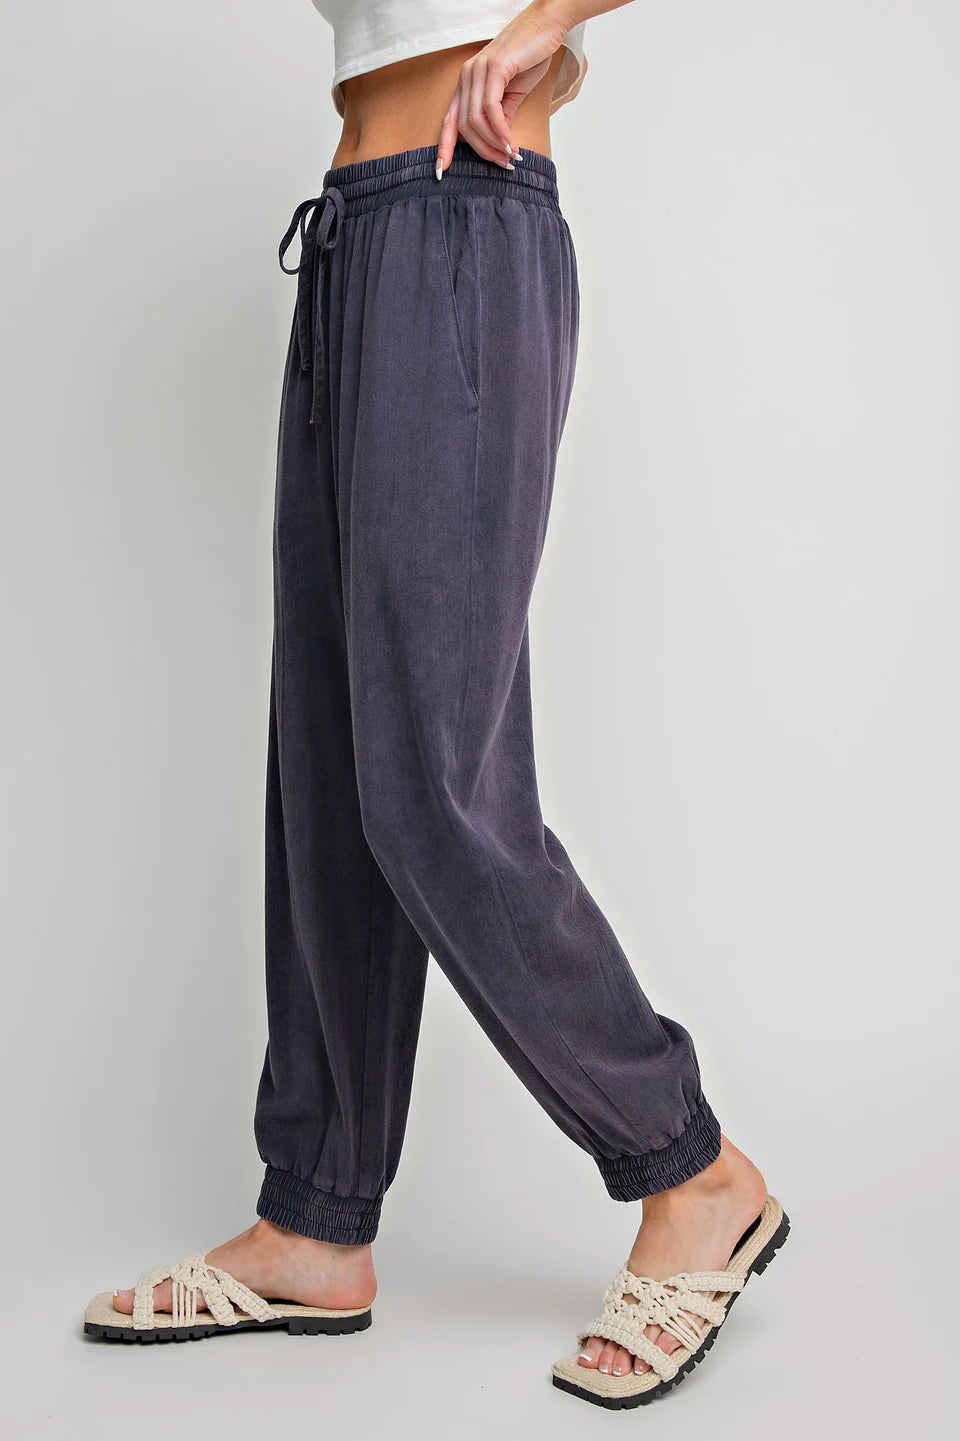 The Devon Jogger Mineral Washed Jogger Pants in Washed Navy